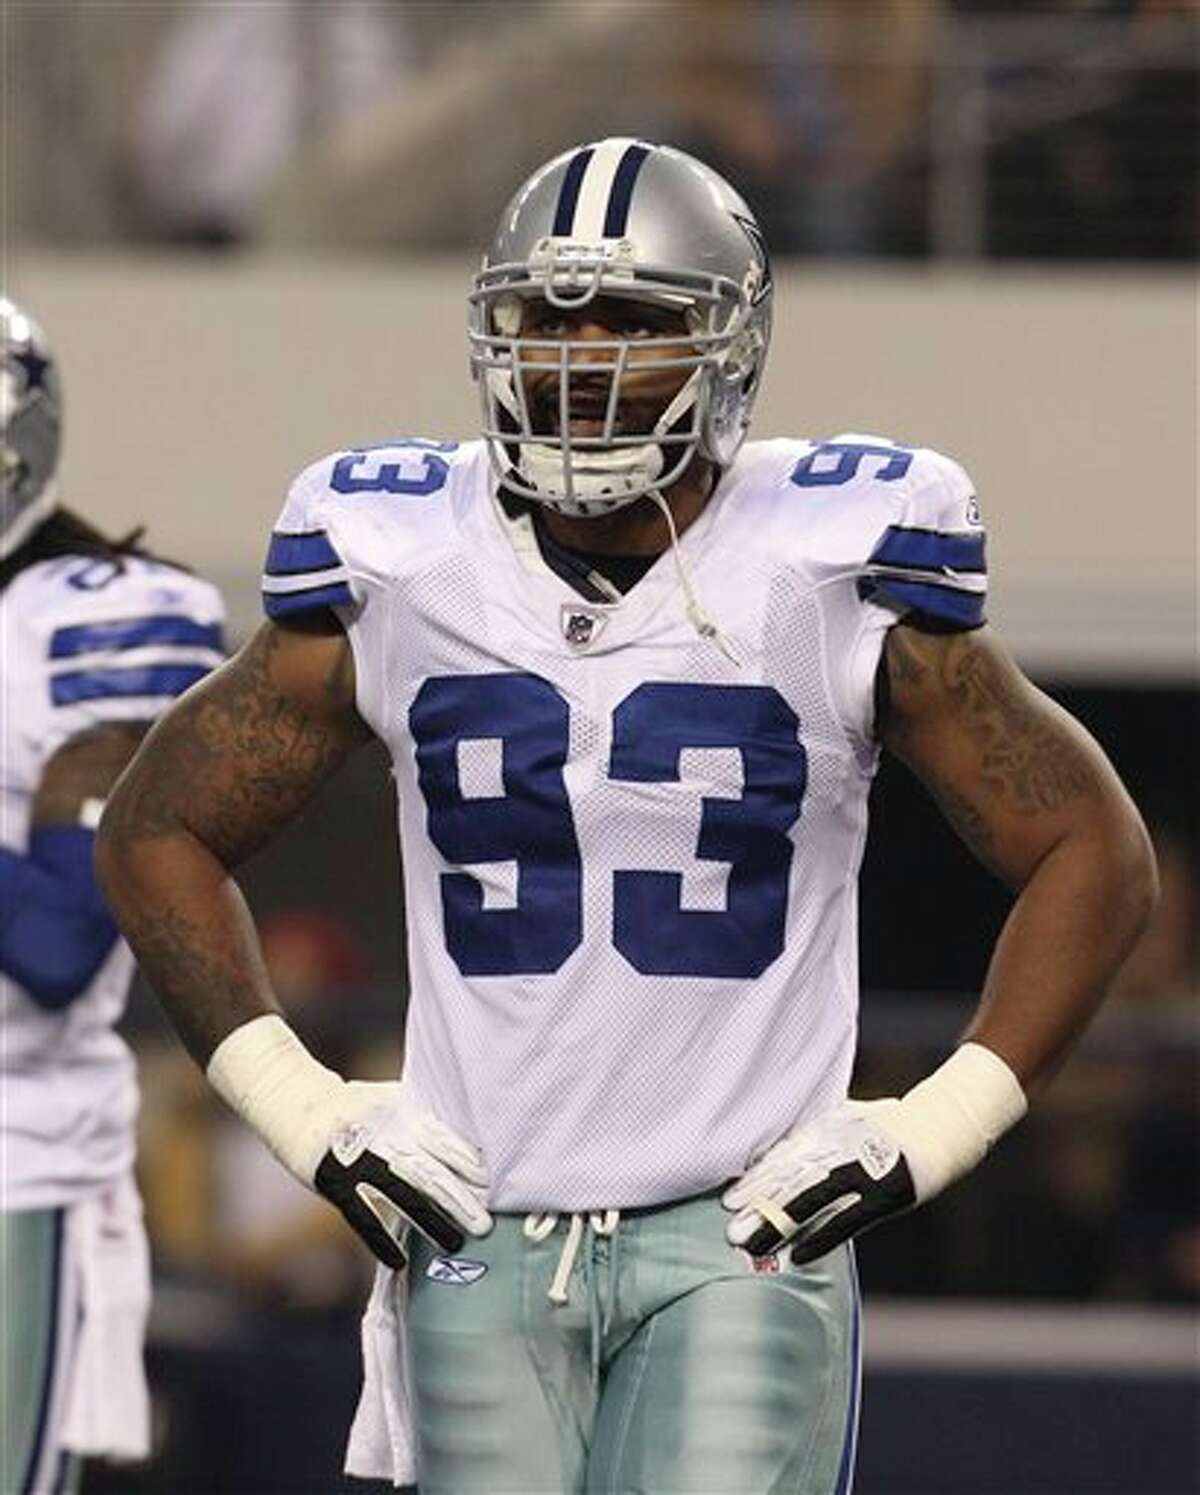 Dallas Cowboys outside linebacker Anthony Spencer (93) during the first half of an NFL football game Saturday, Dec. 24, 2011, in Arlington, Texas. (AP Photo/Sharon Ellman)